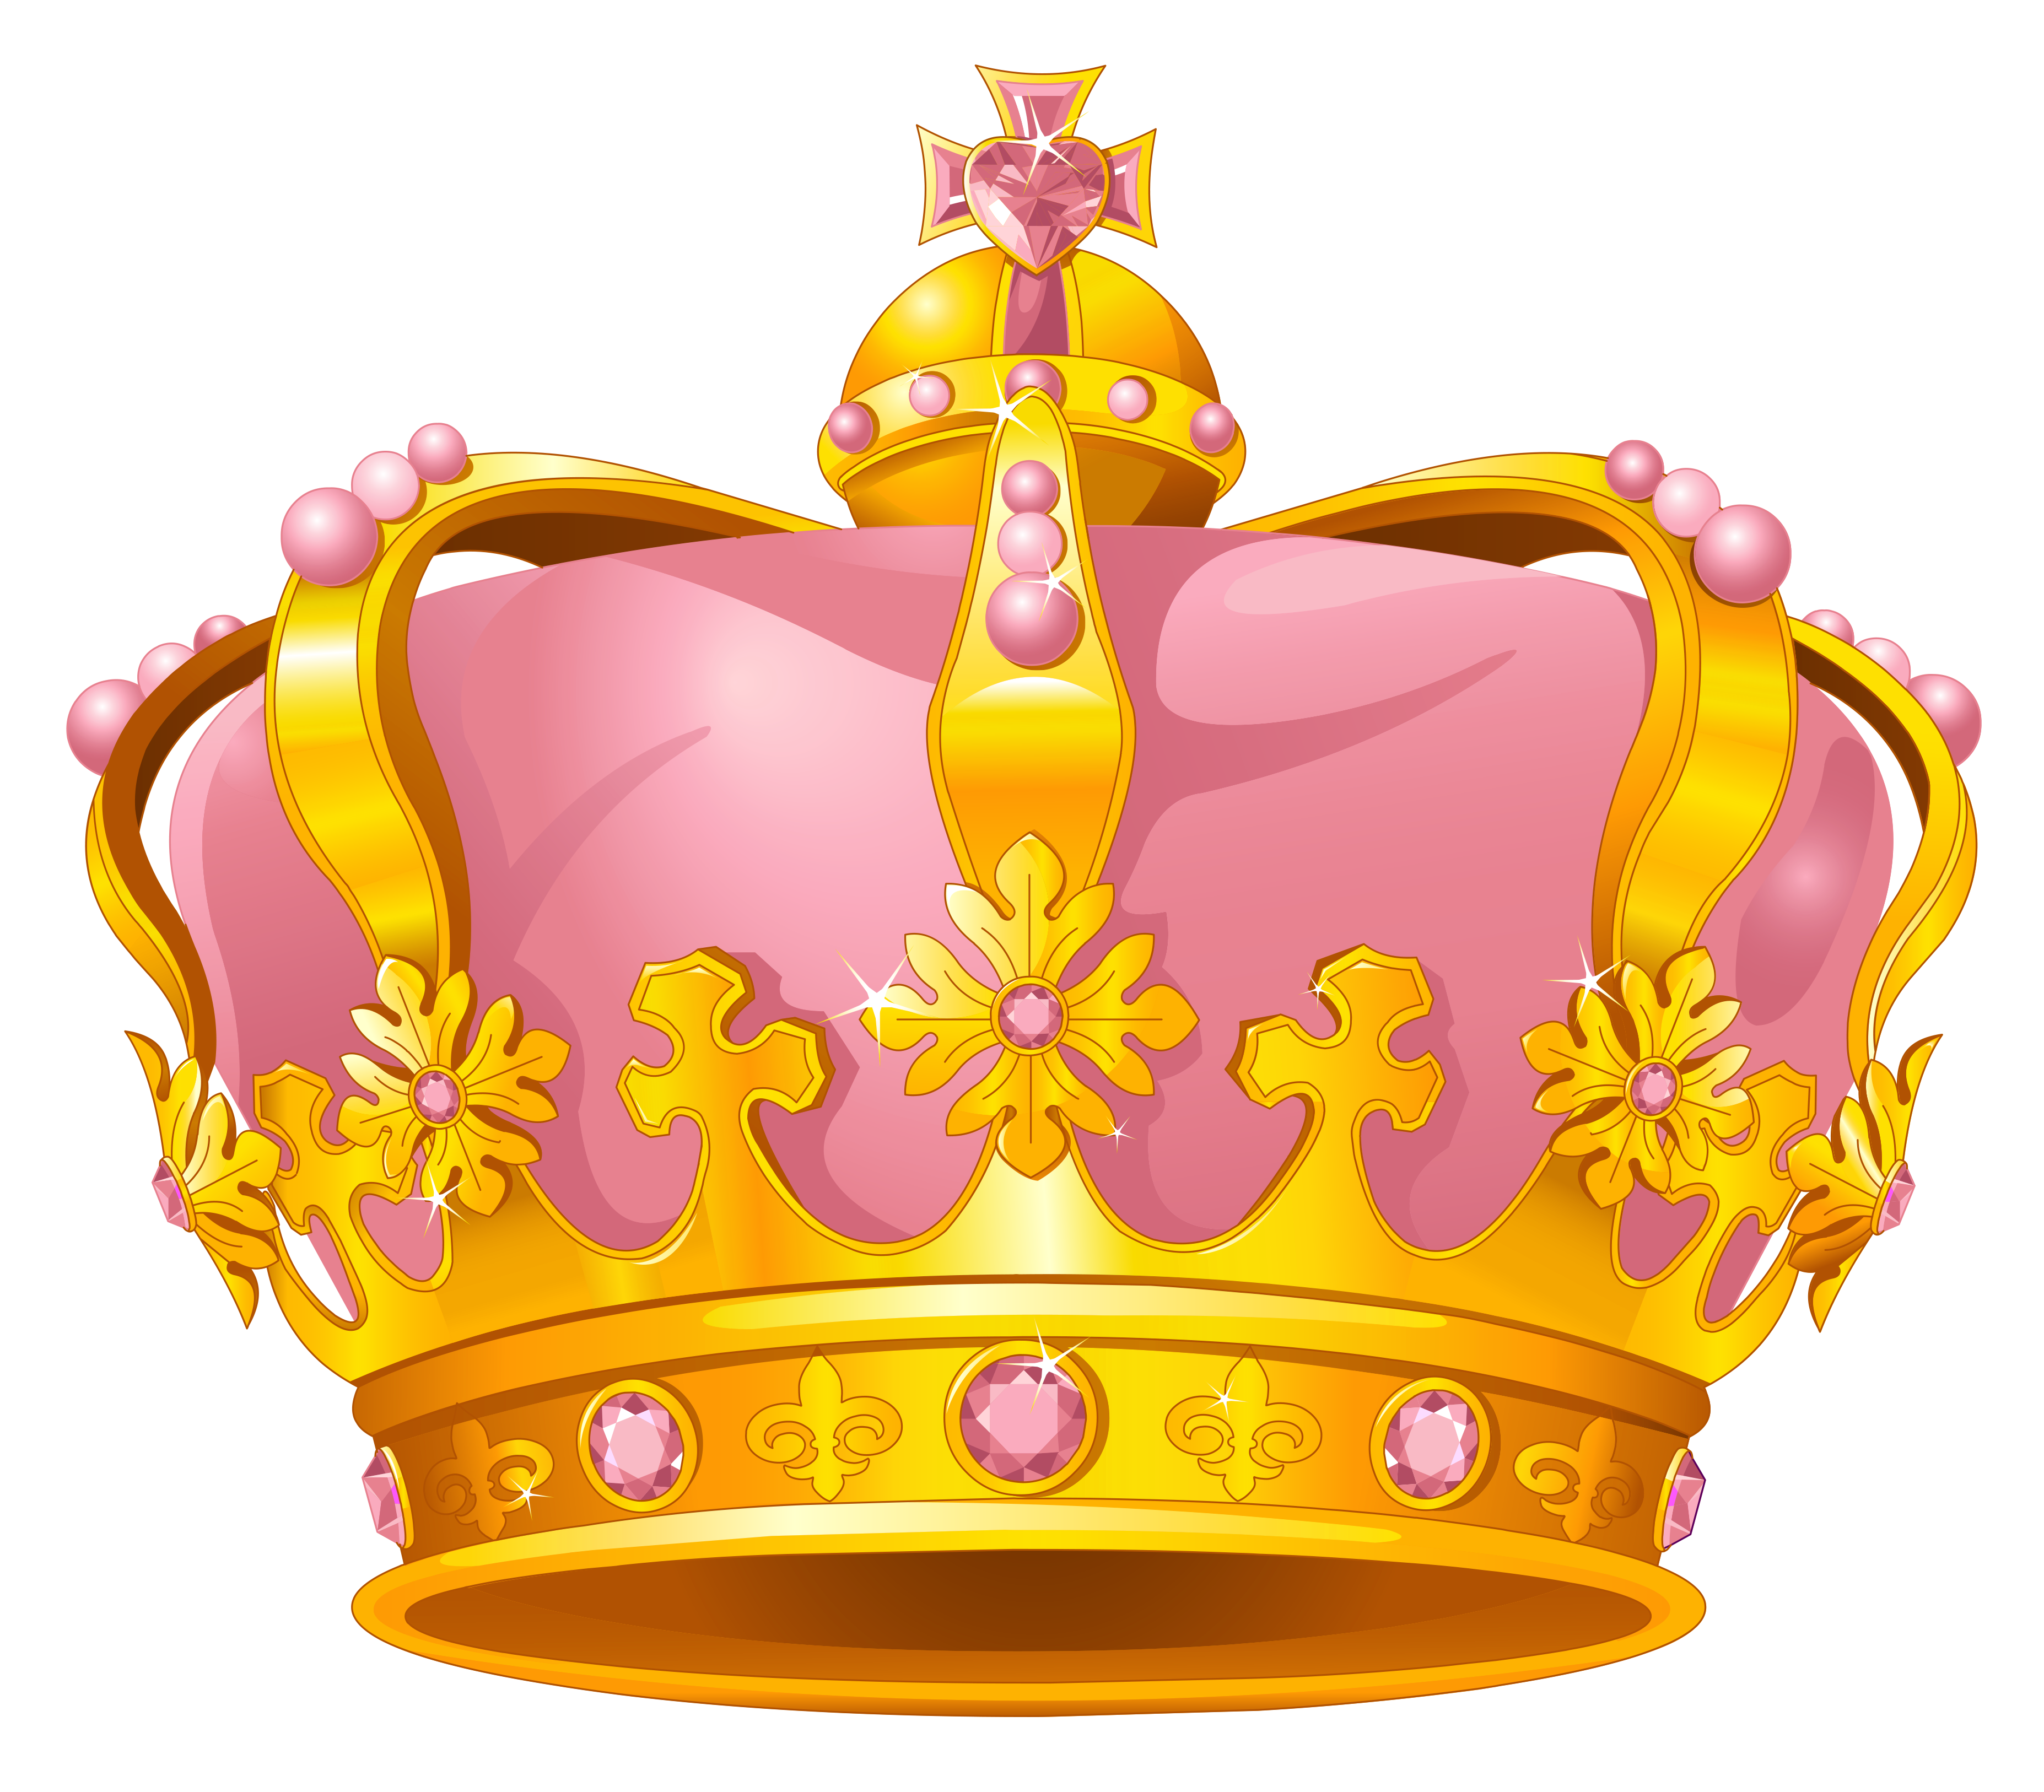 Crowns clipart girly. From poetry to pornography